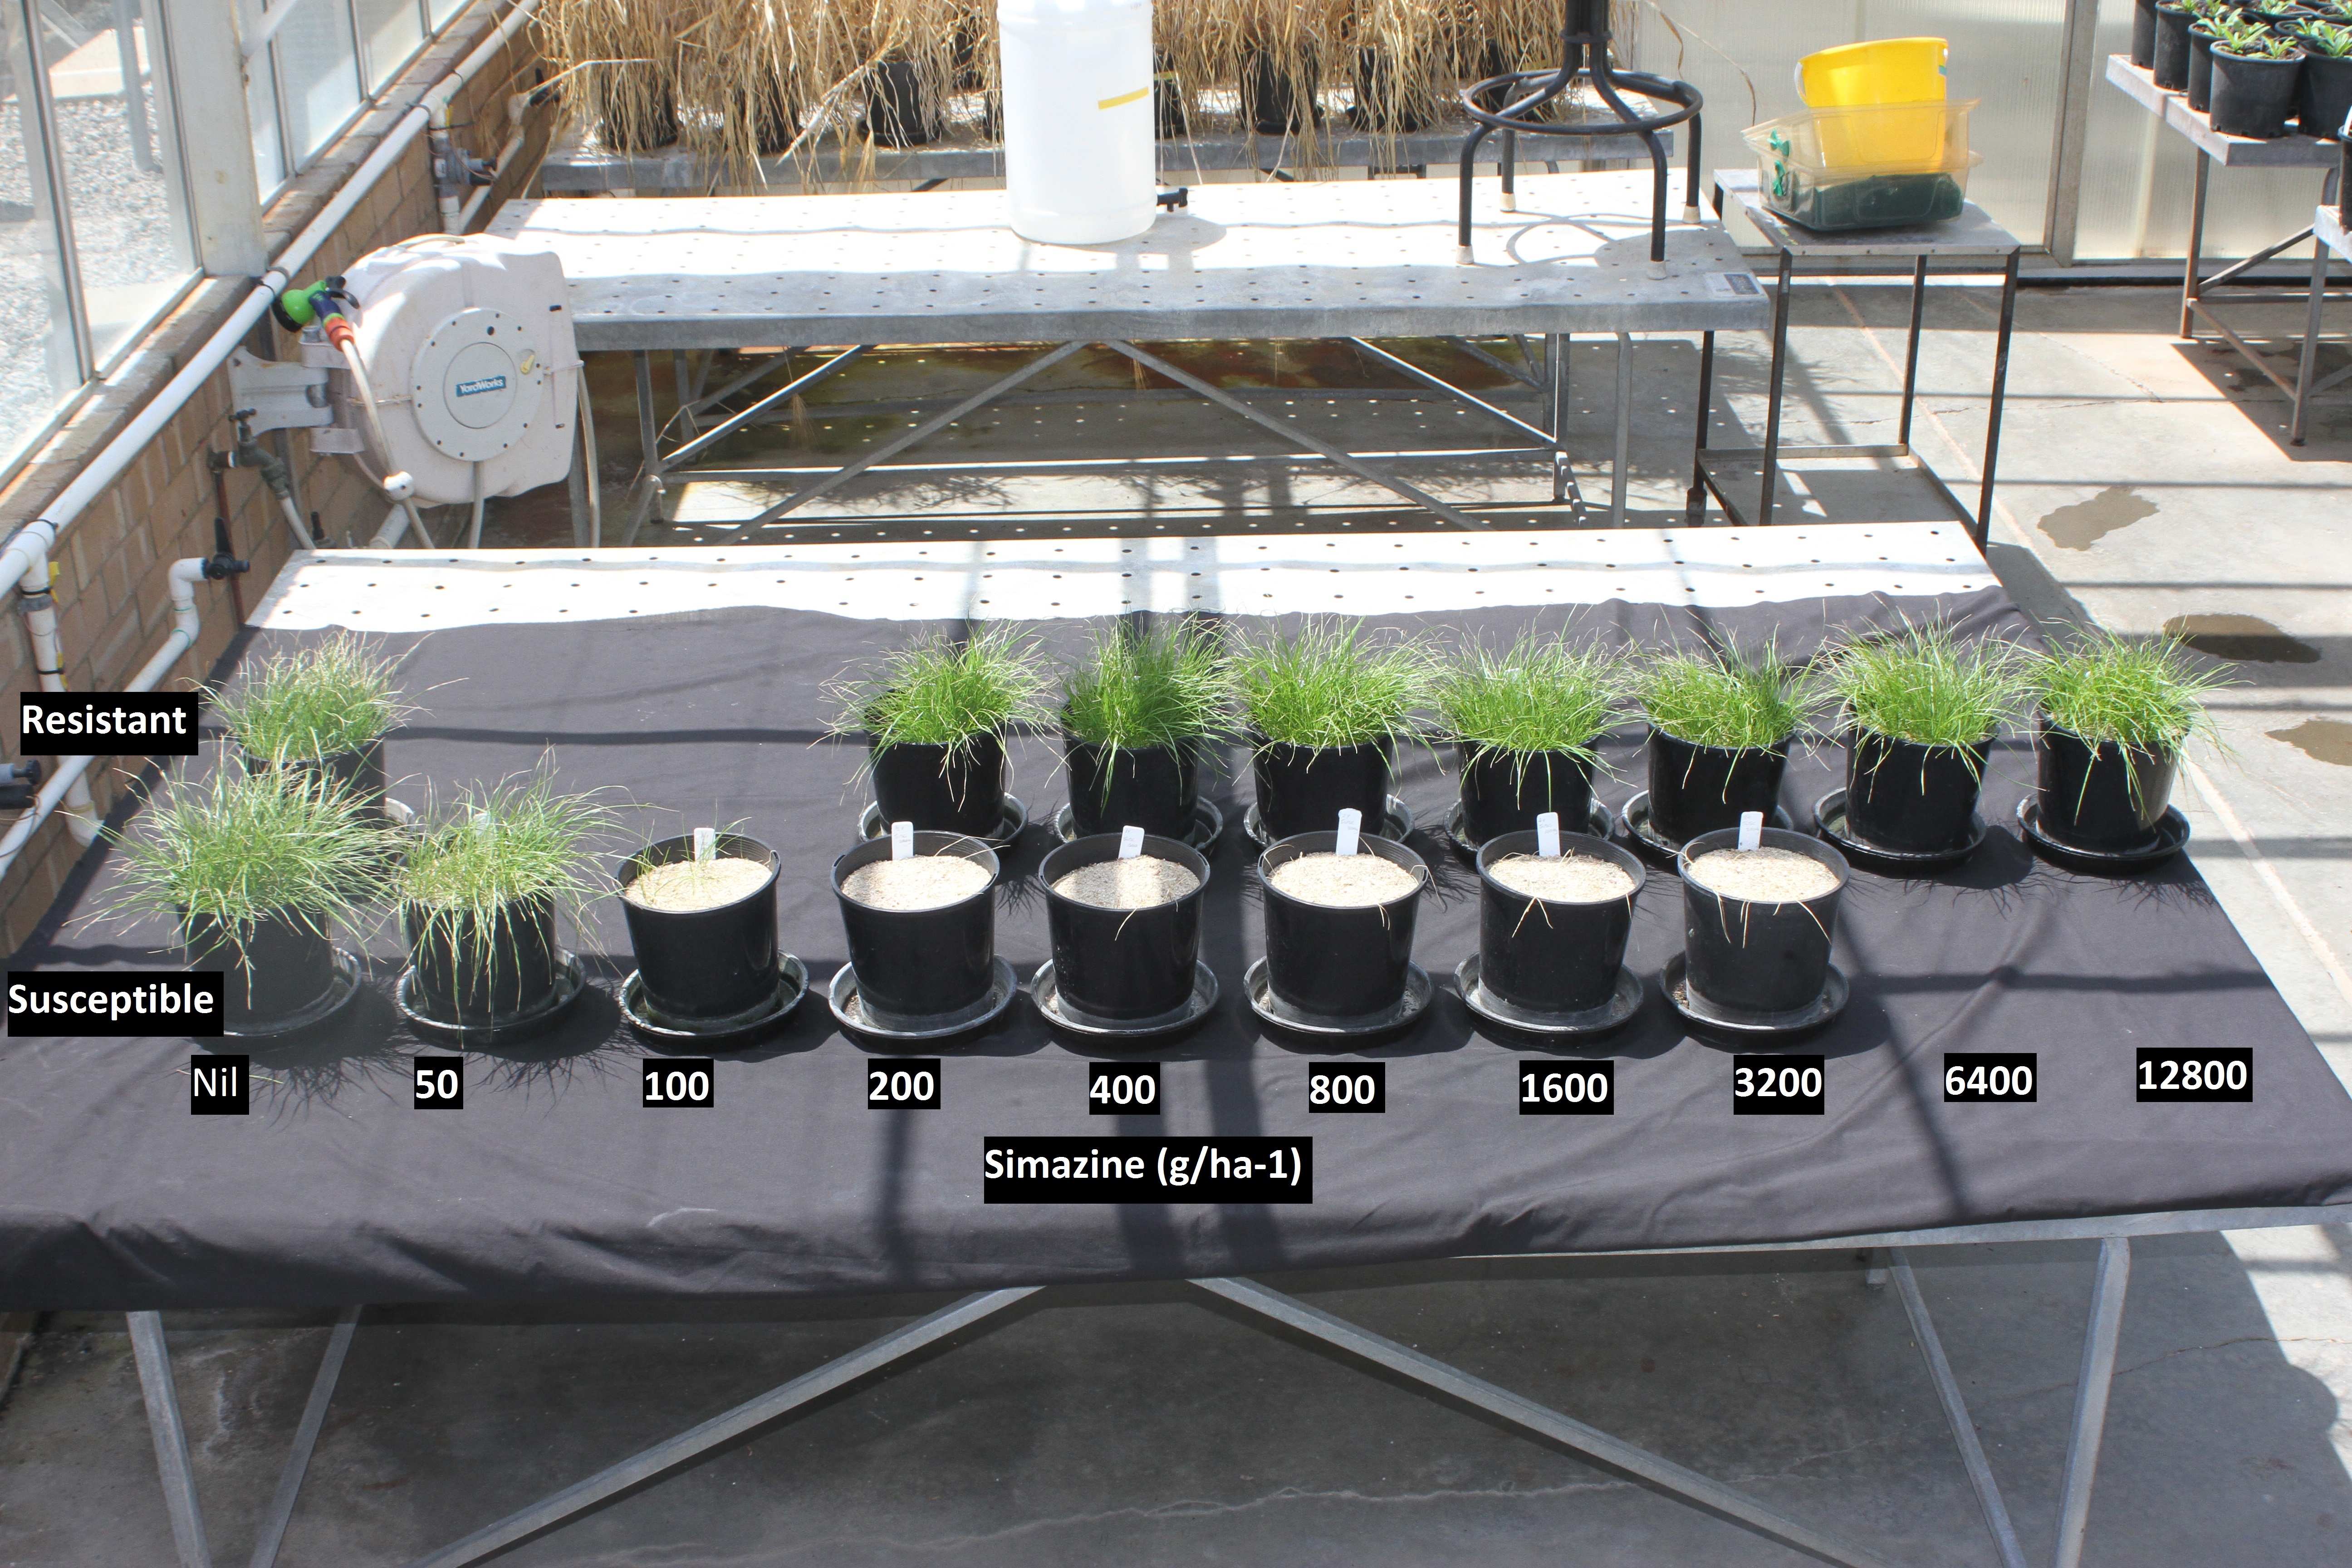 Figure 2. Picture of treated pots of silver grass. Resistant (Pingelly) population at rear, susceptible population at front. Simazine dose shown adjacent to treated pots.